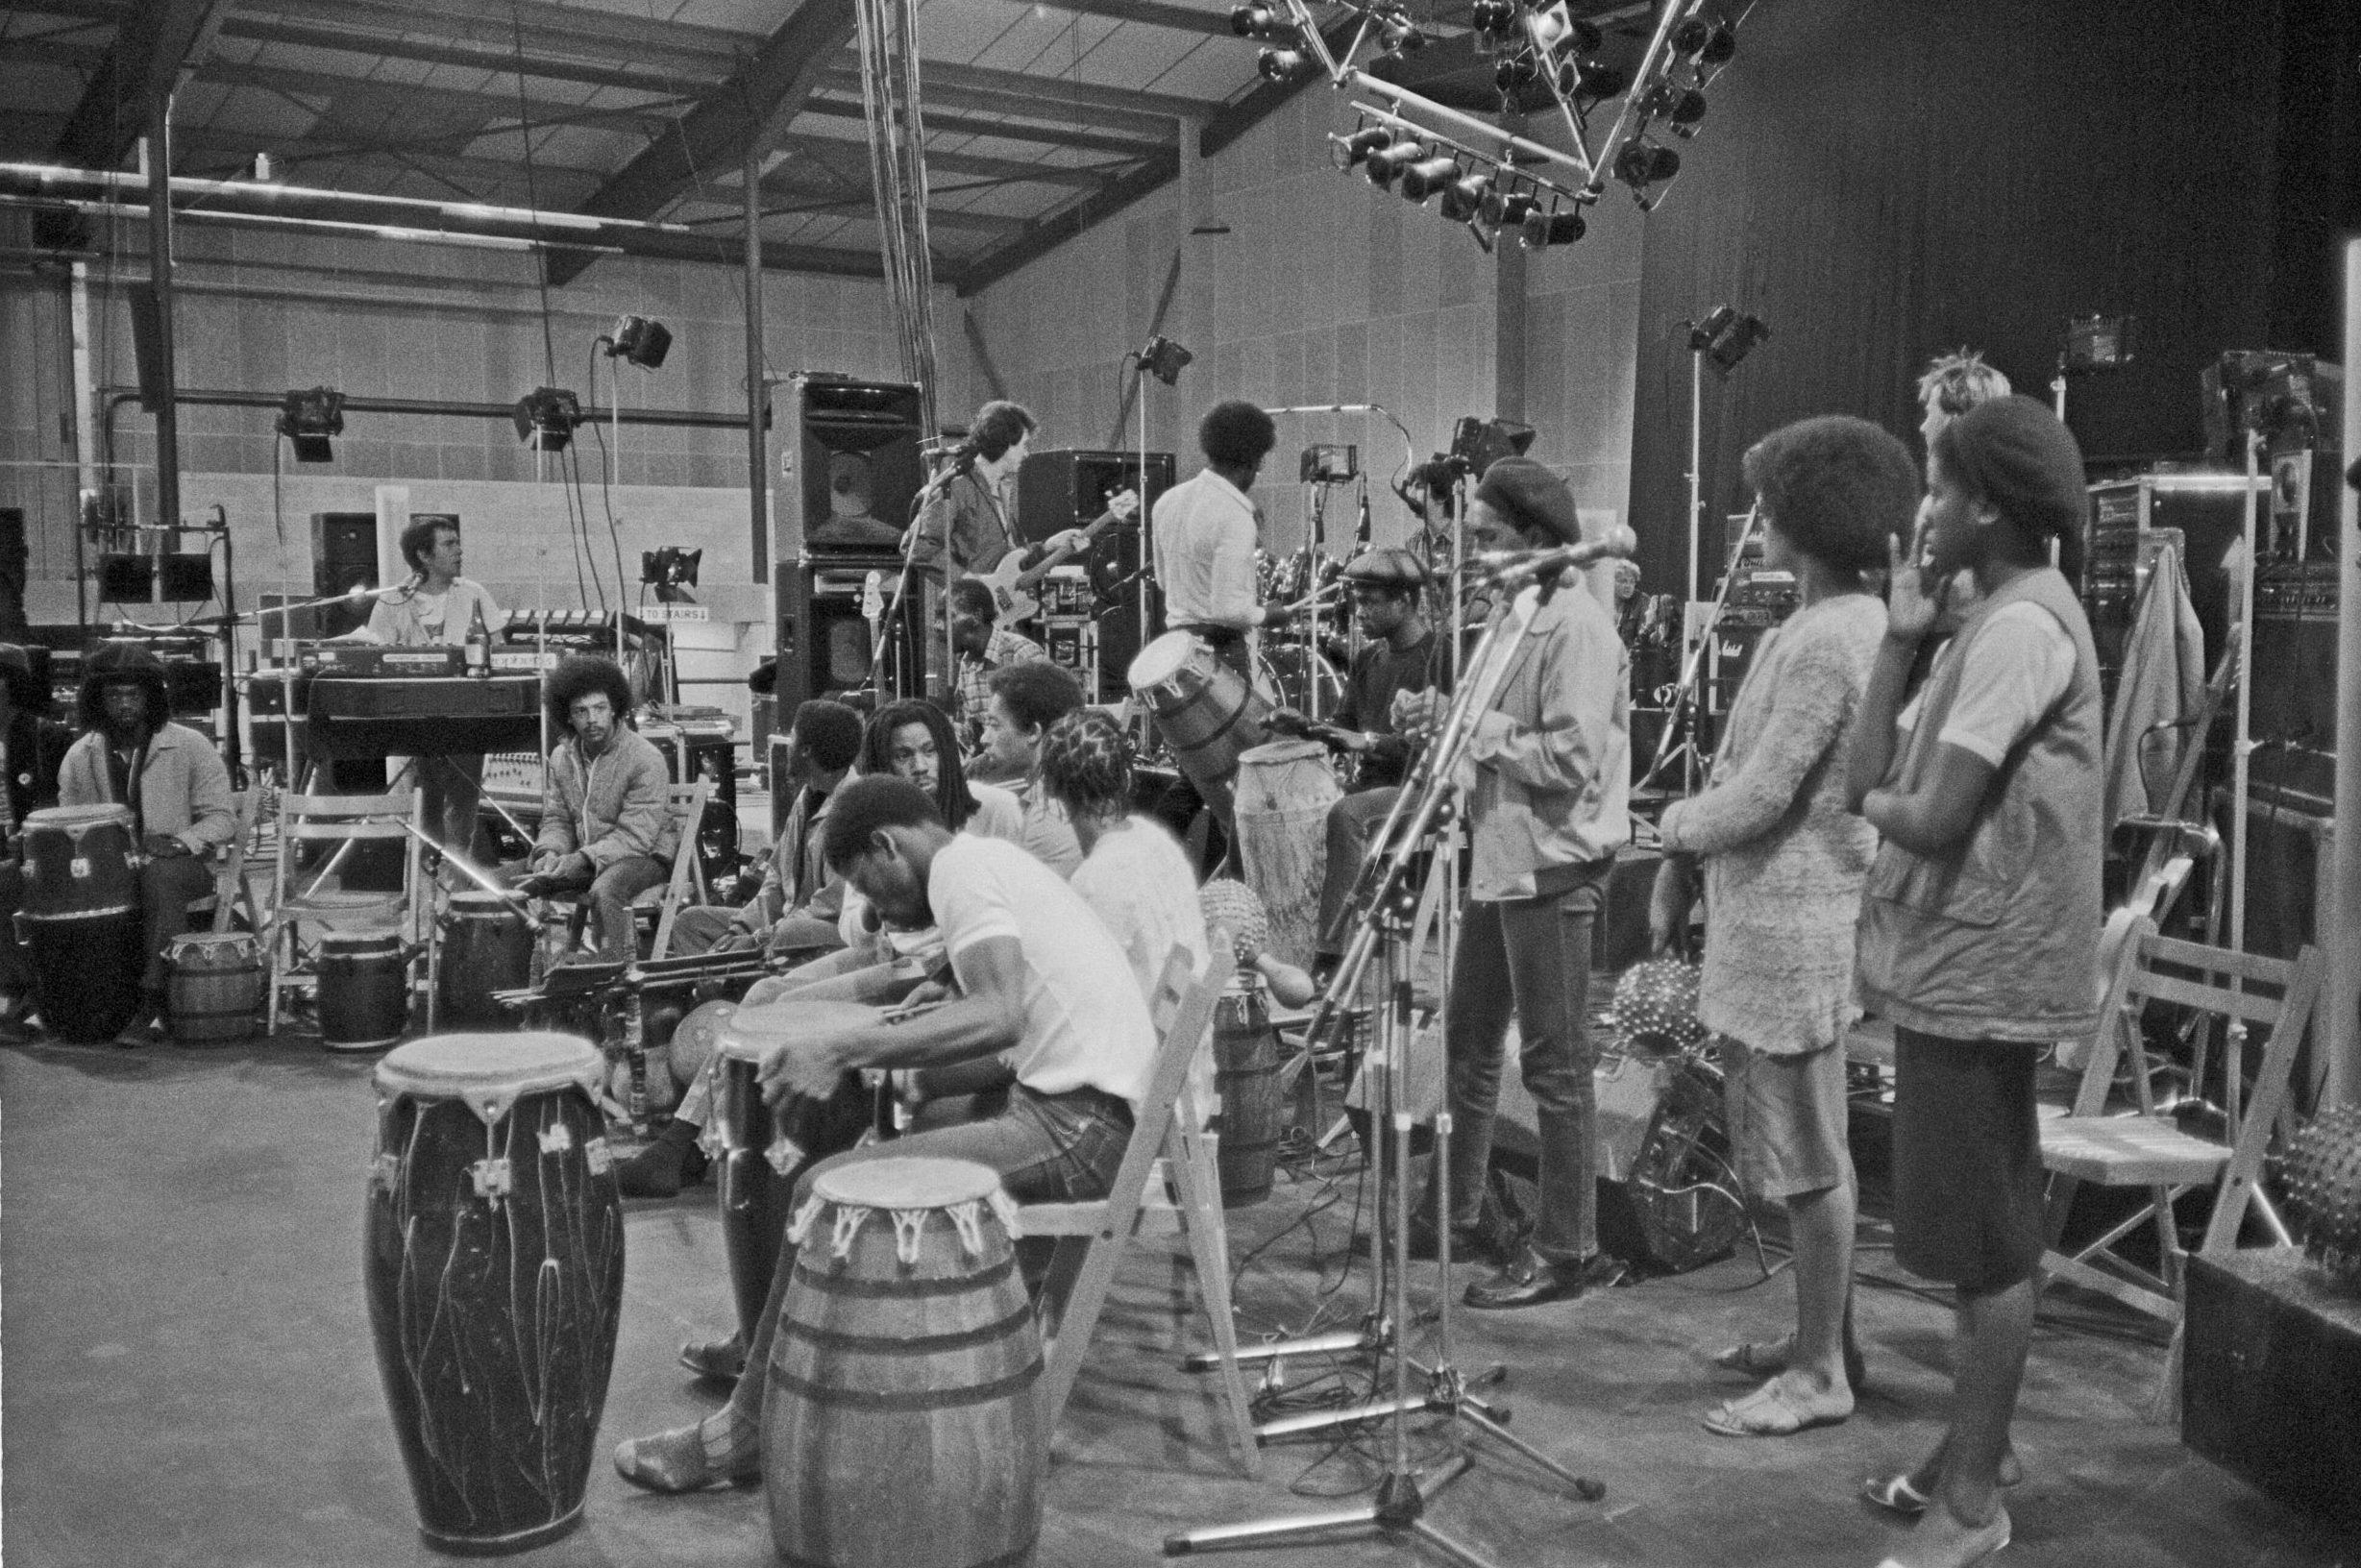 Ekome rehearse with Peter Gabriel before their performance at WOMAD 1982